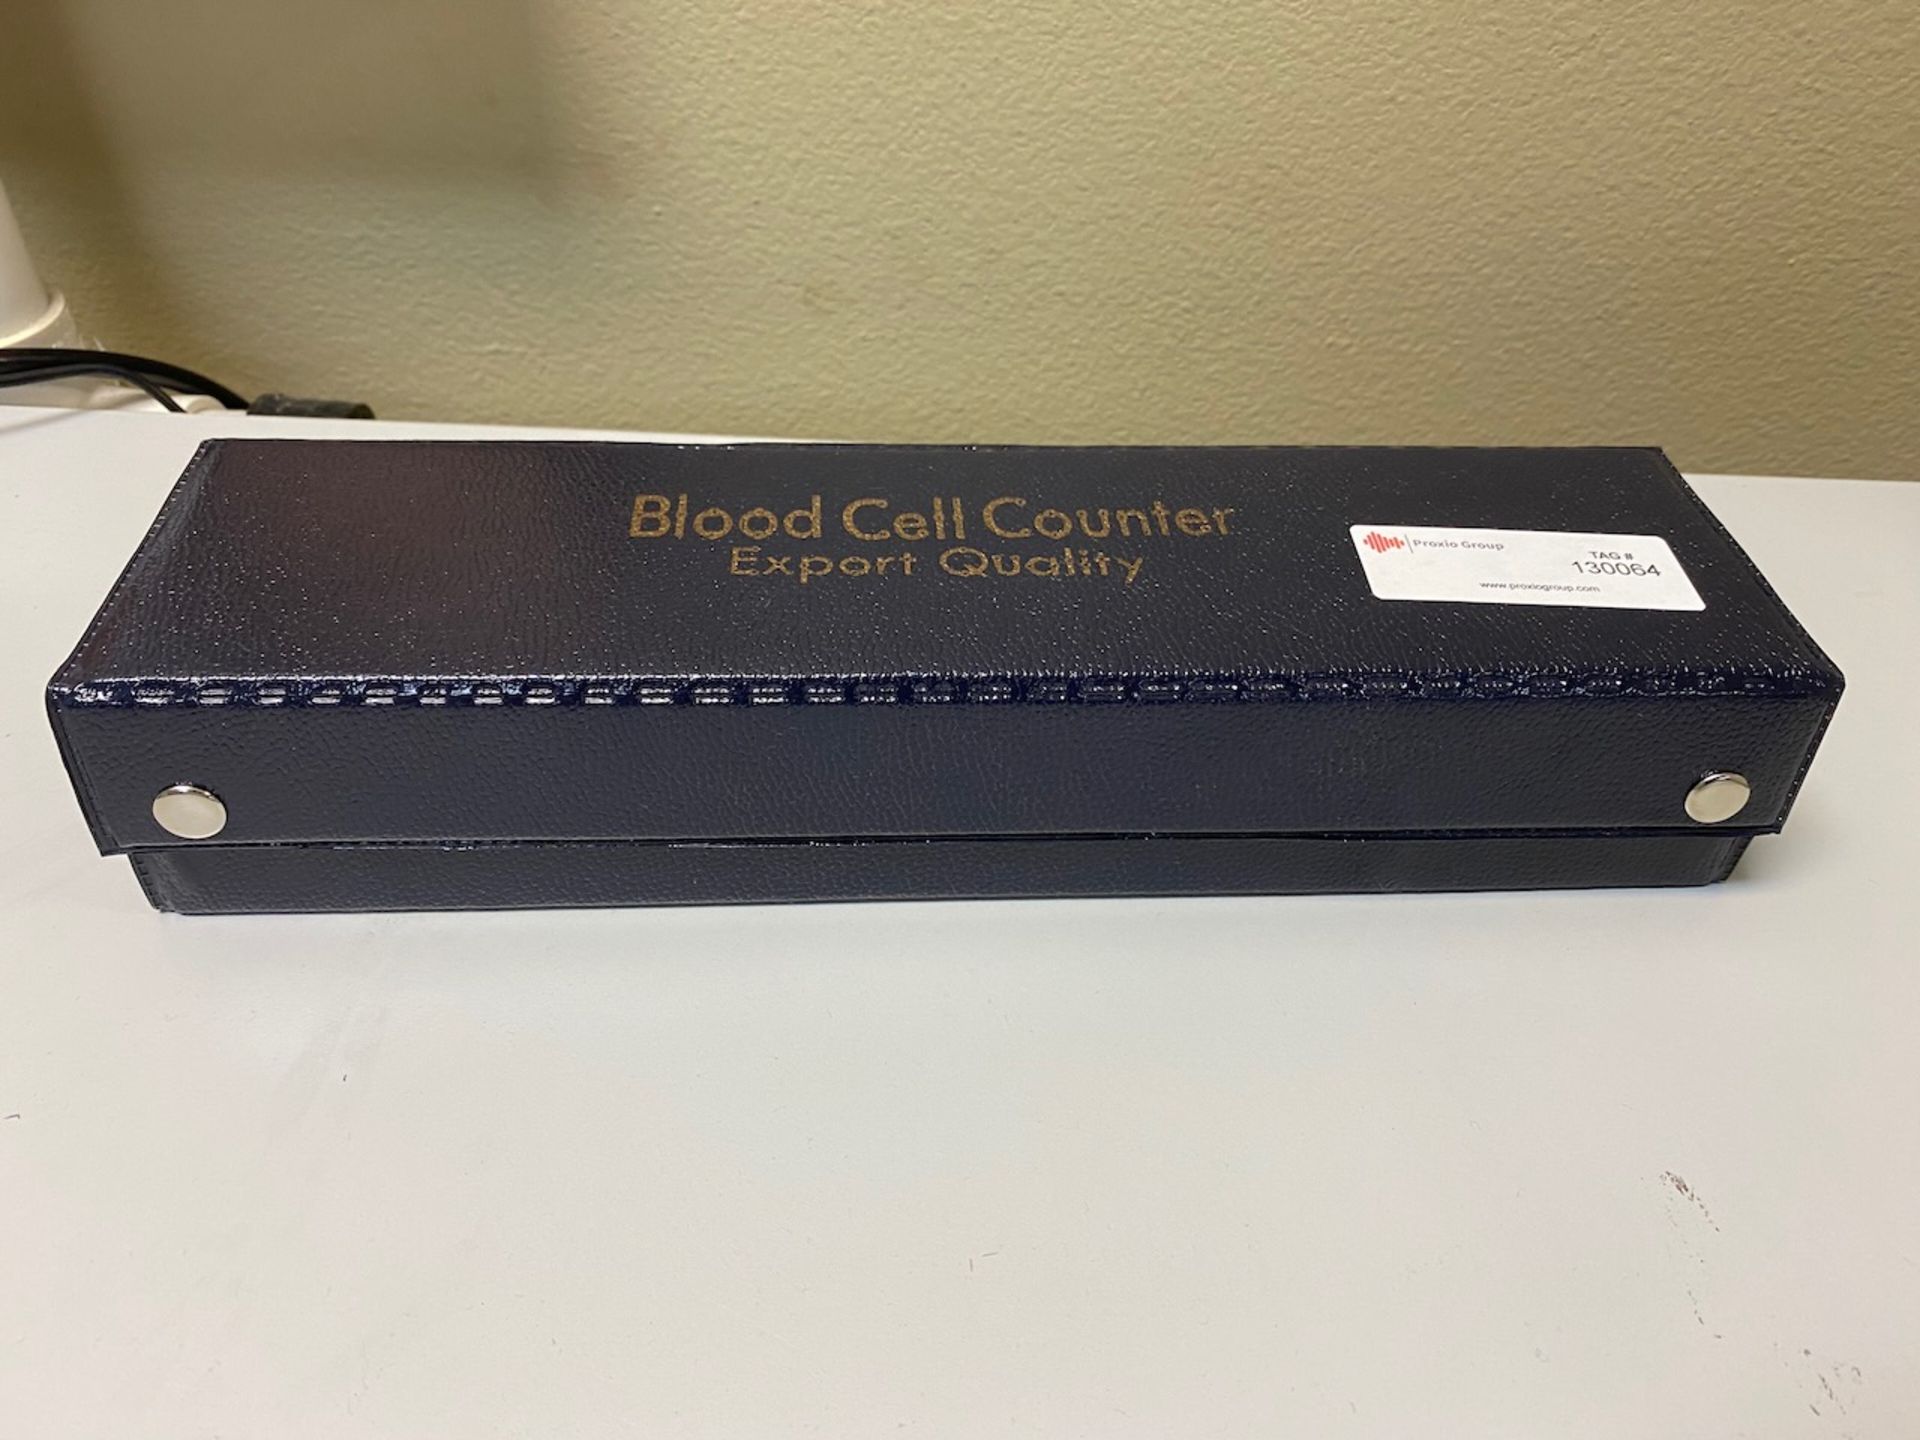 Blood Cell Counter